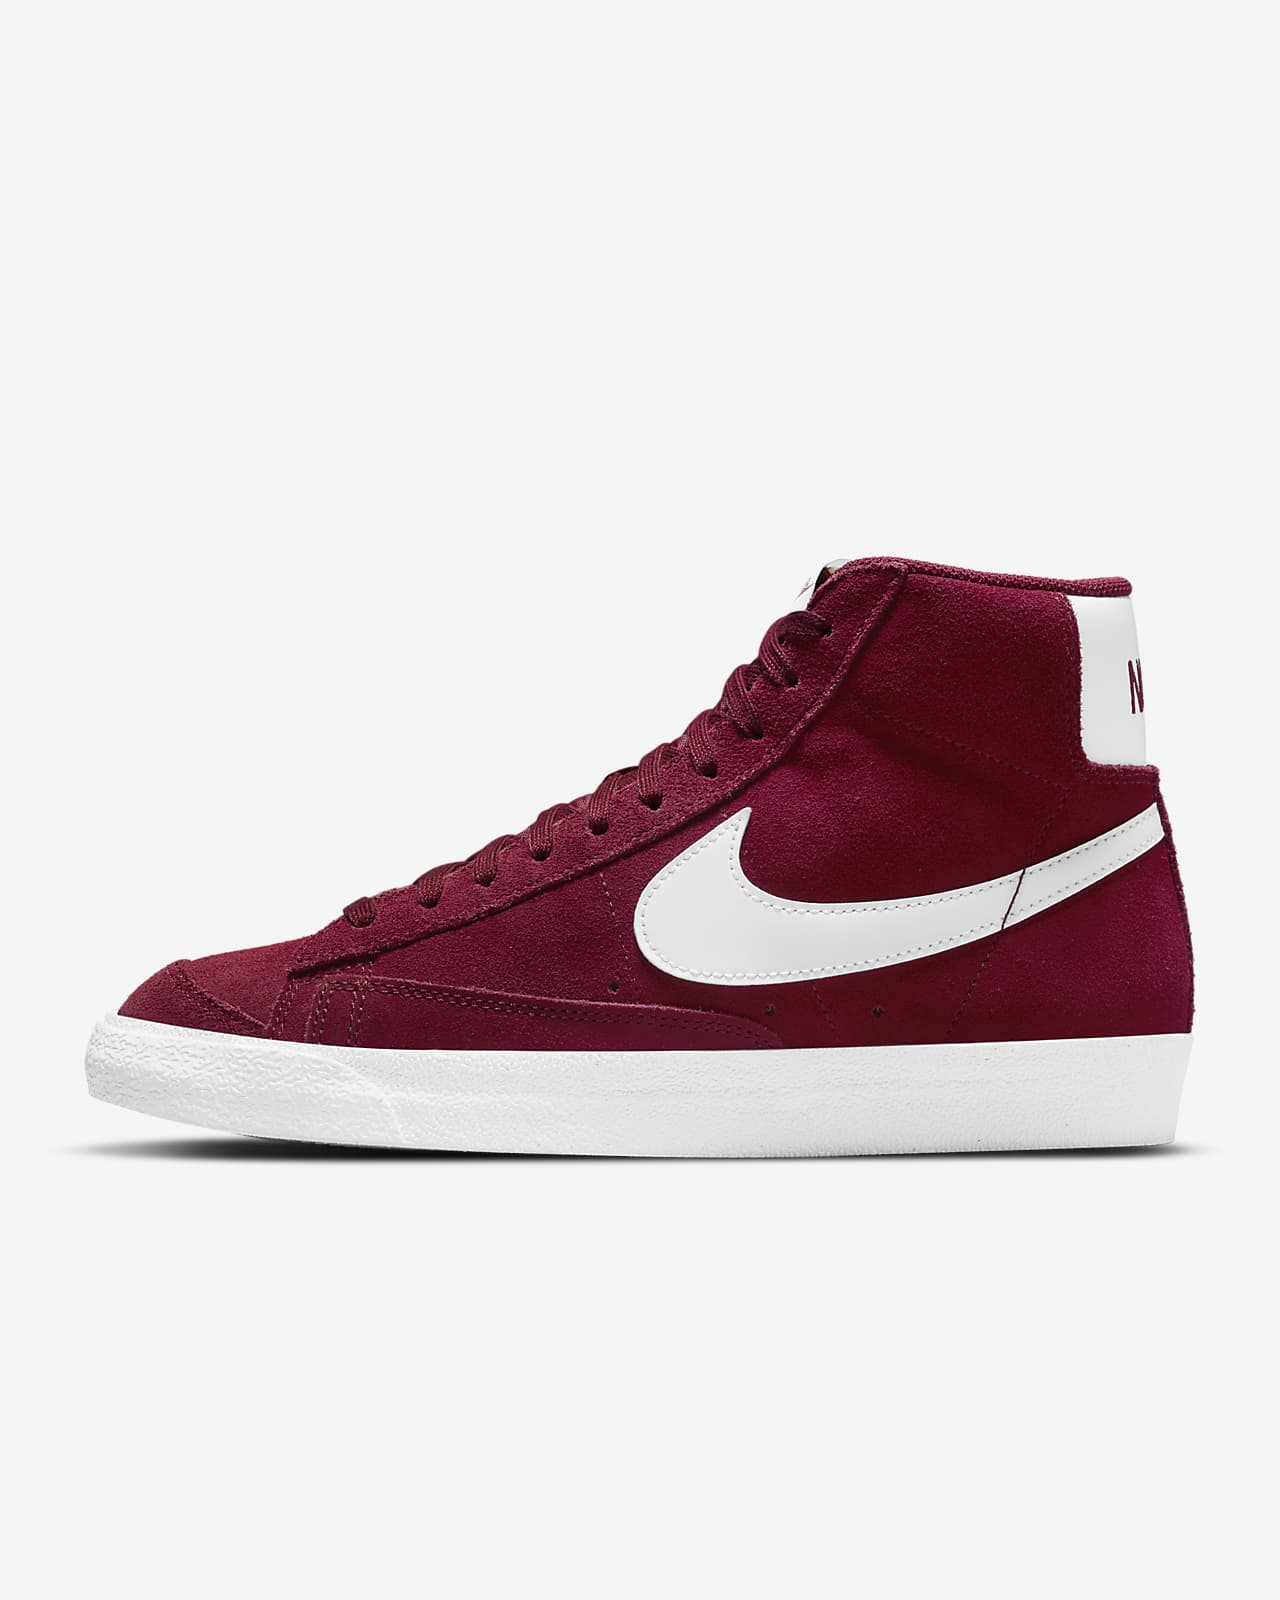 Nike Blazer Mid '77 Suede Shoes